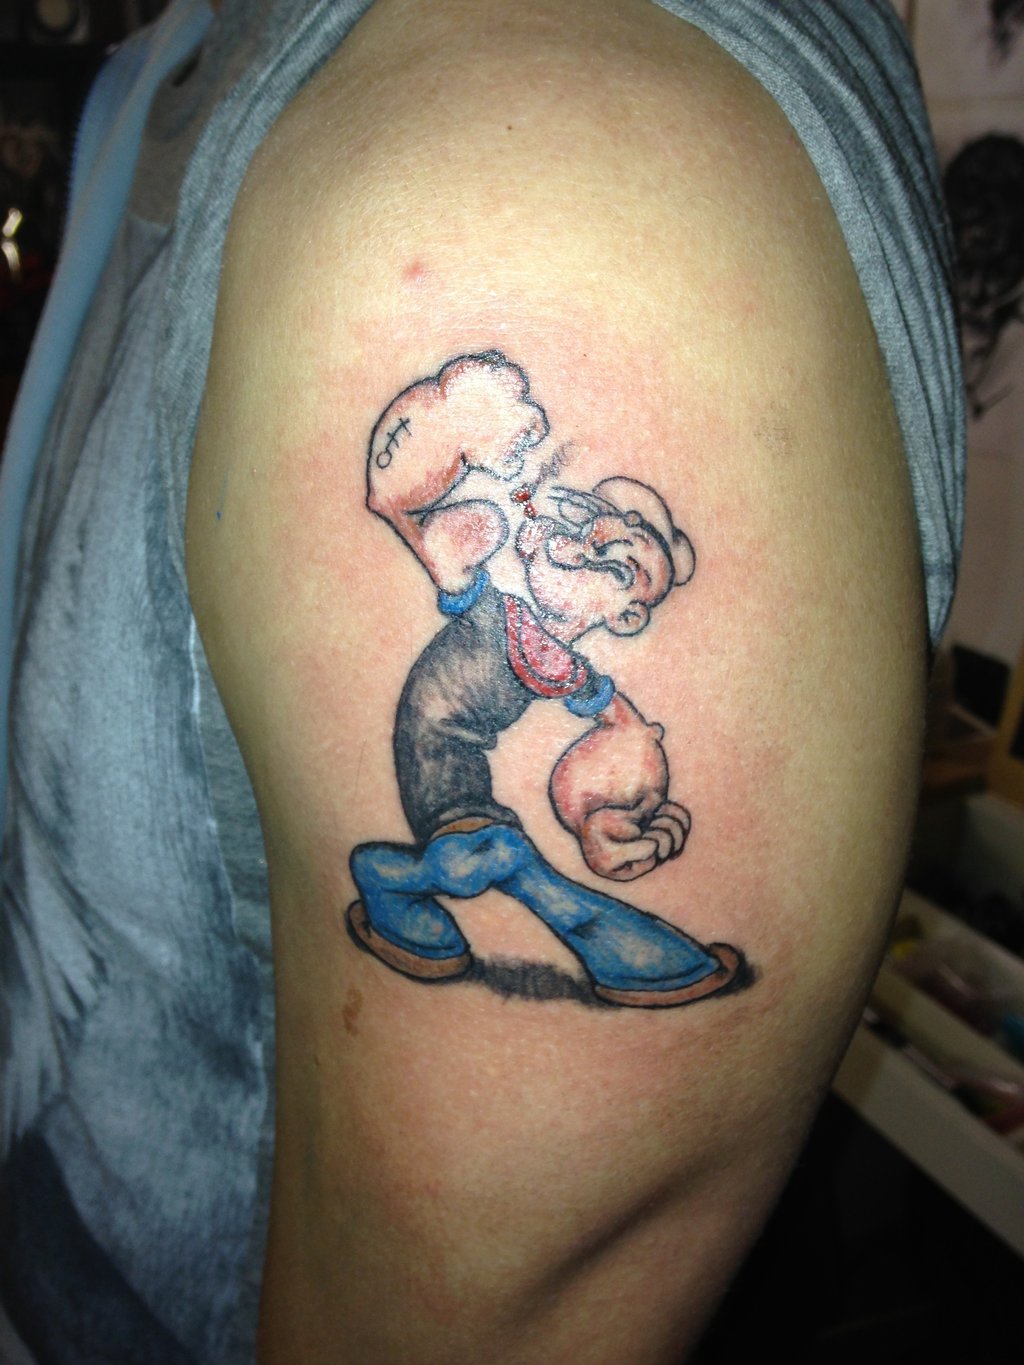 Popeye Tattoos Designs, Ideas and Meaning | Tattoos For You